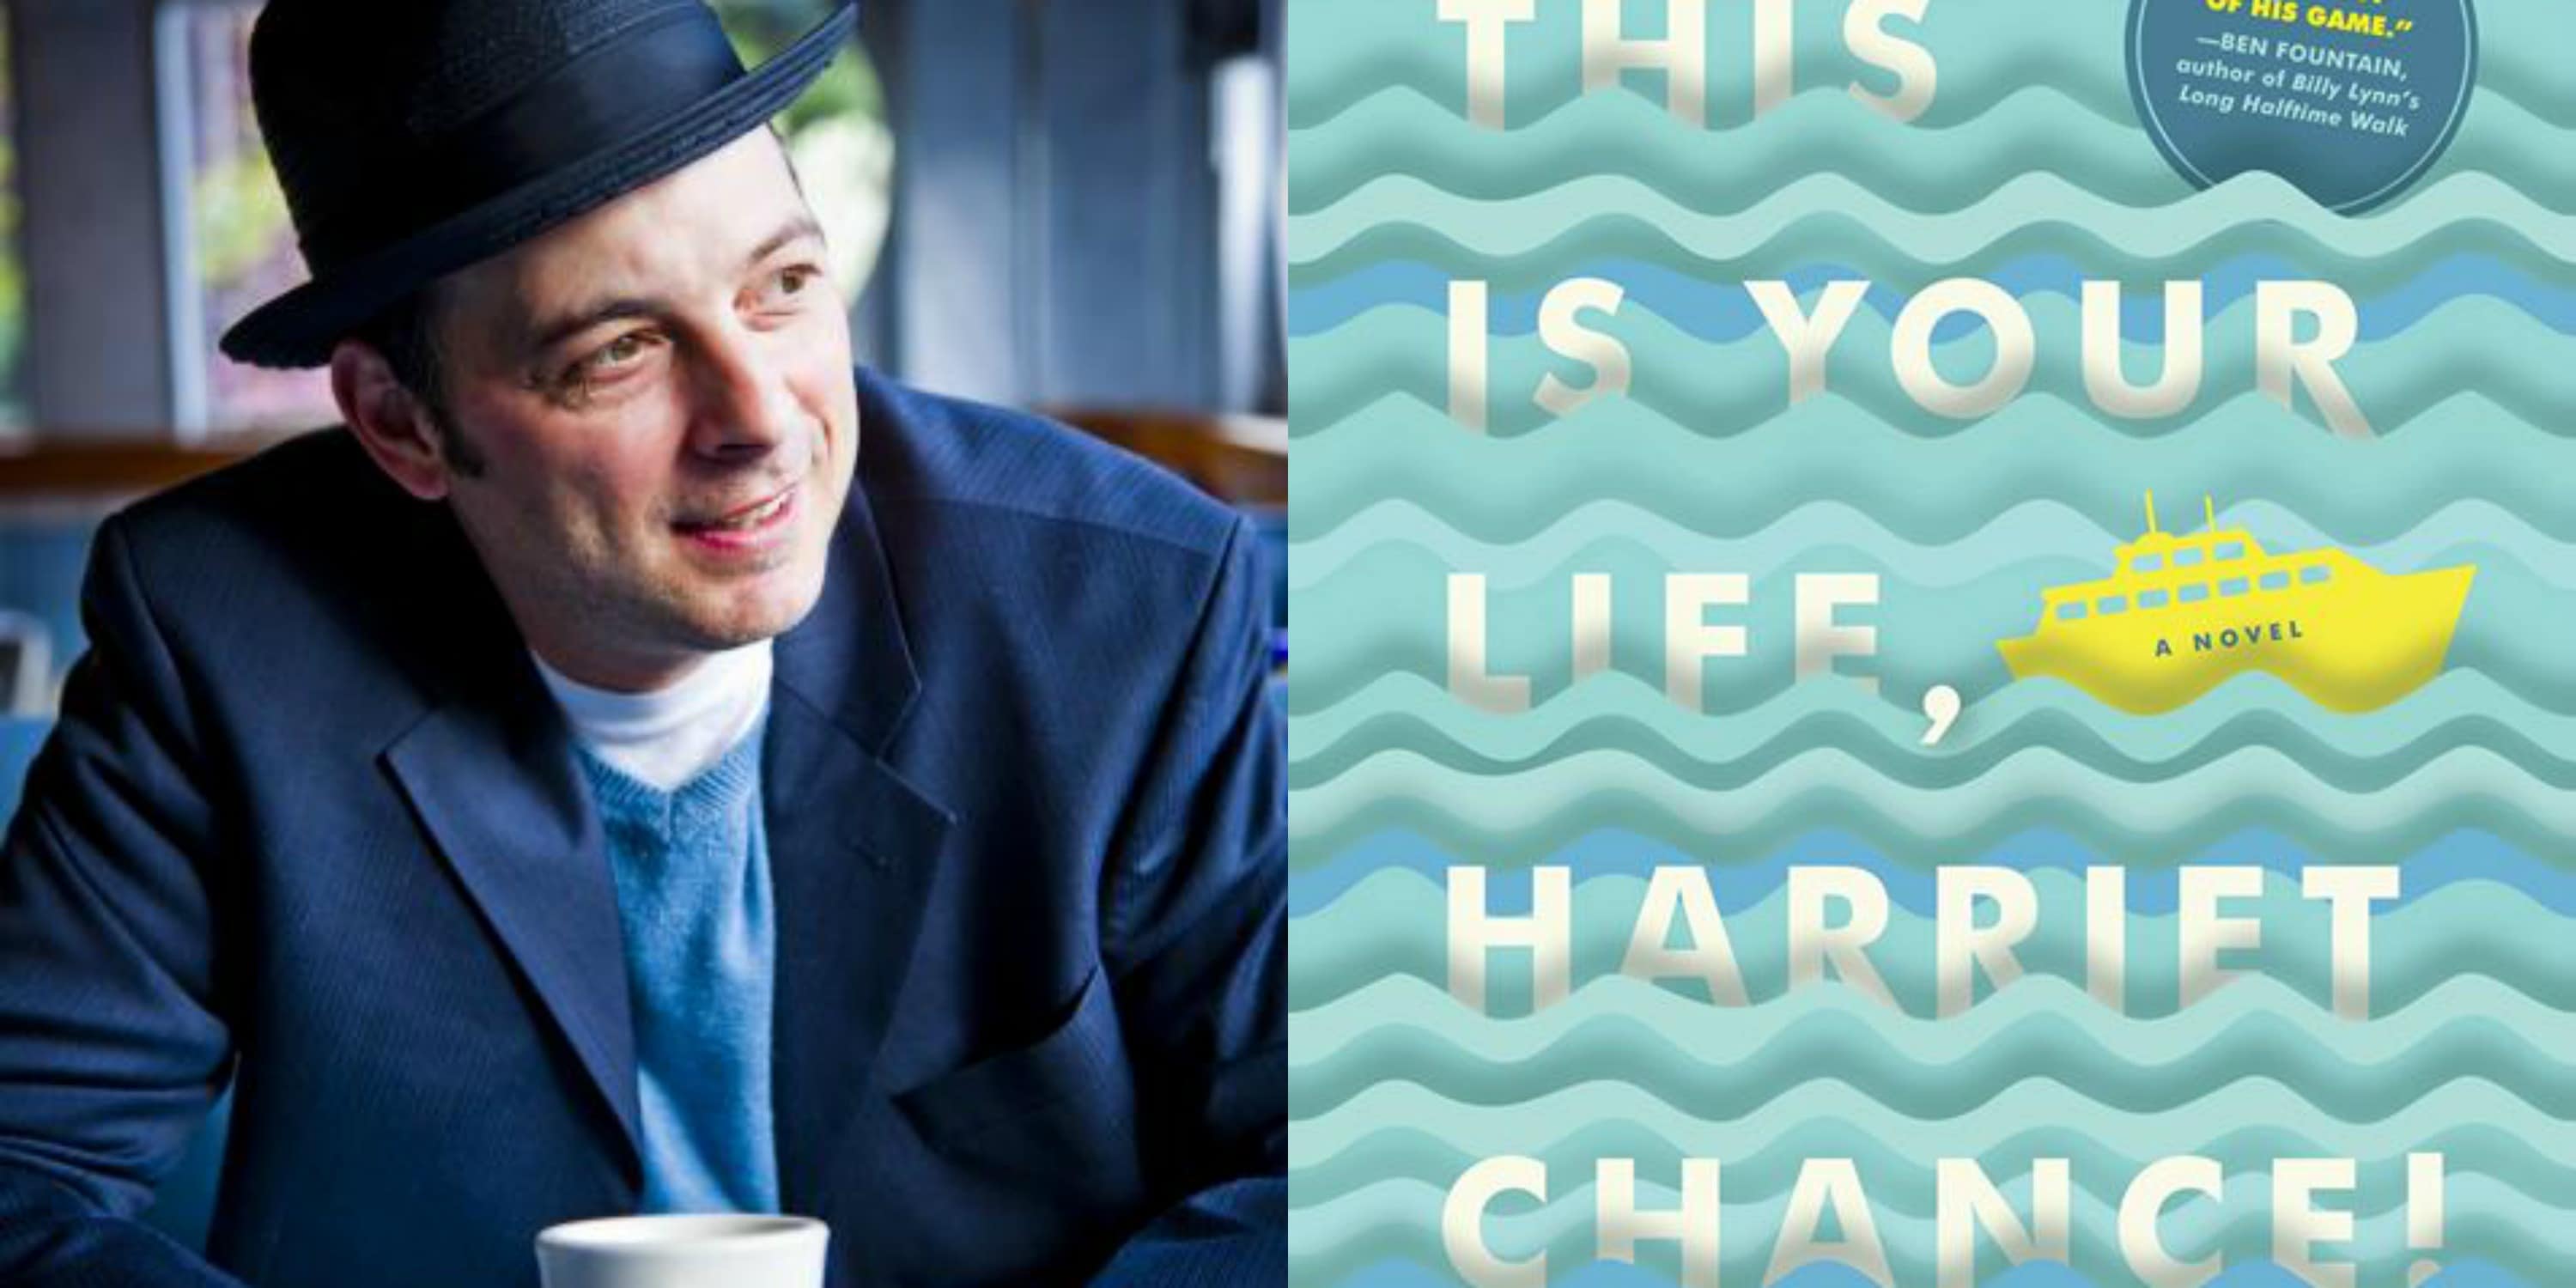 Sundays With Writers: This is Your Life, Harriet Chance by ...